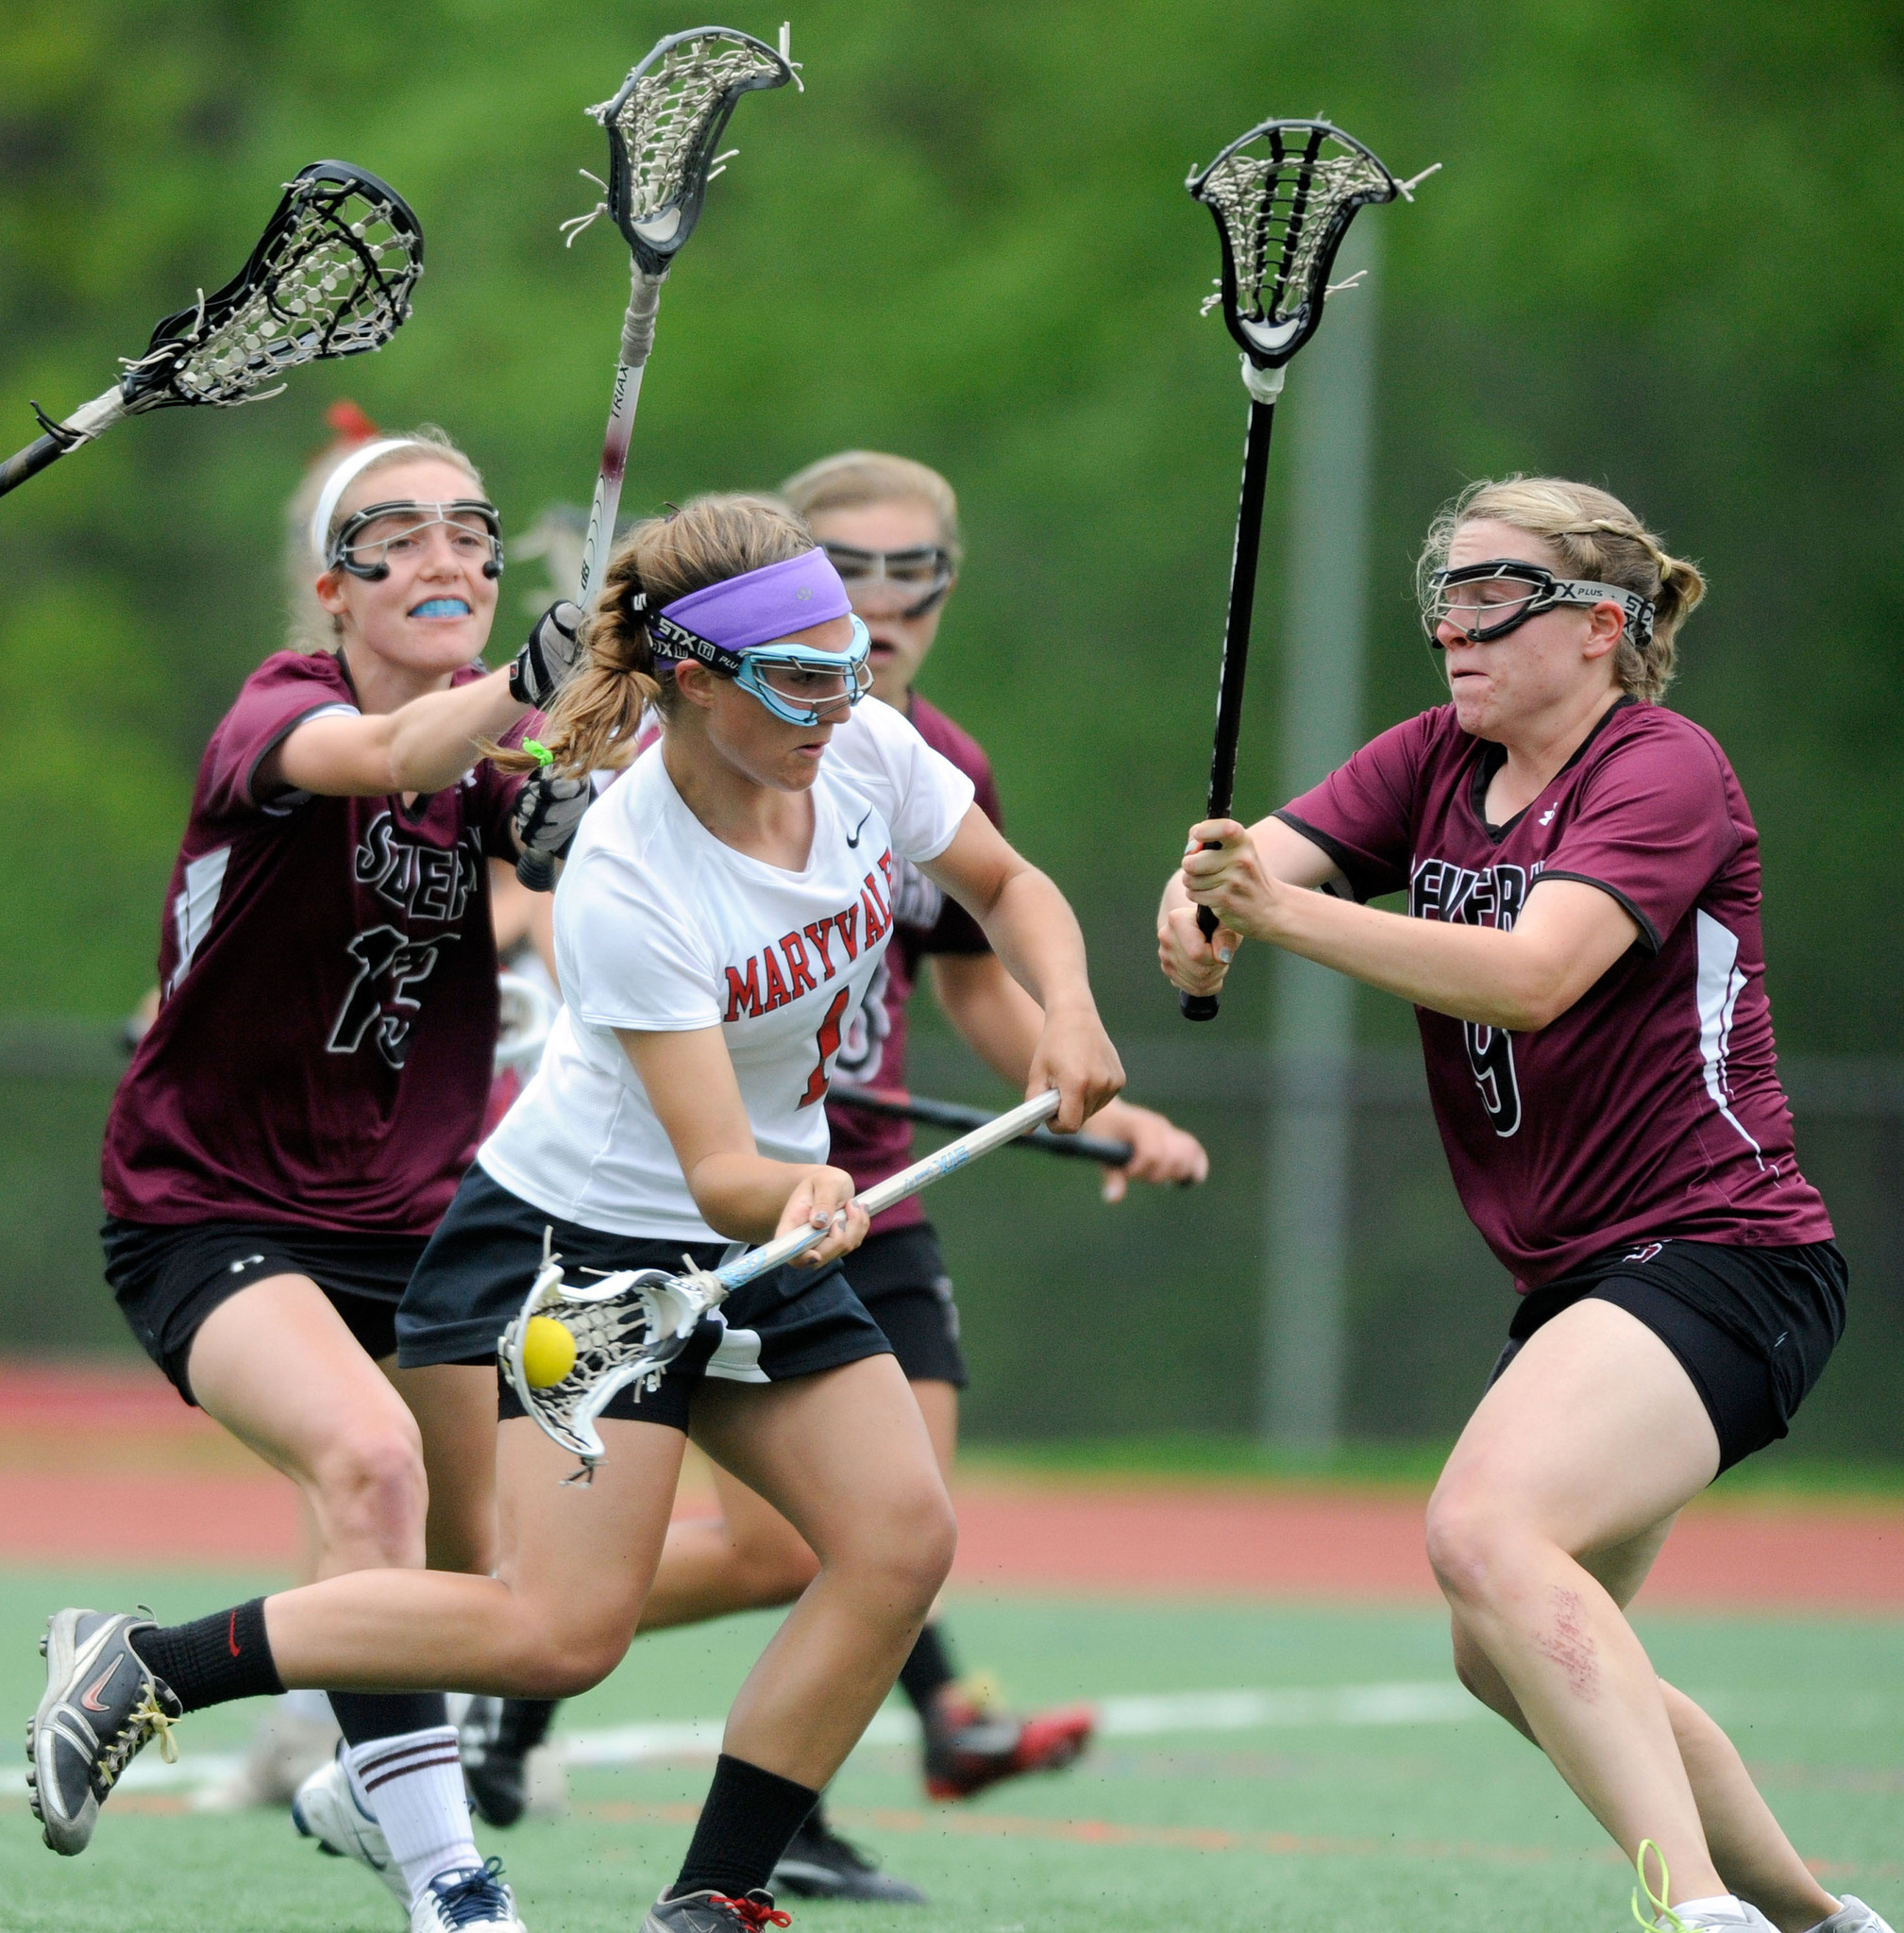 Maryvale defeats Severn 14-8 in girls lacrosse - Baltimore Sun